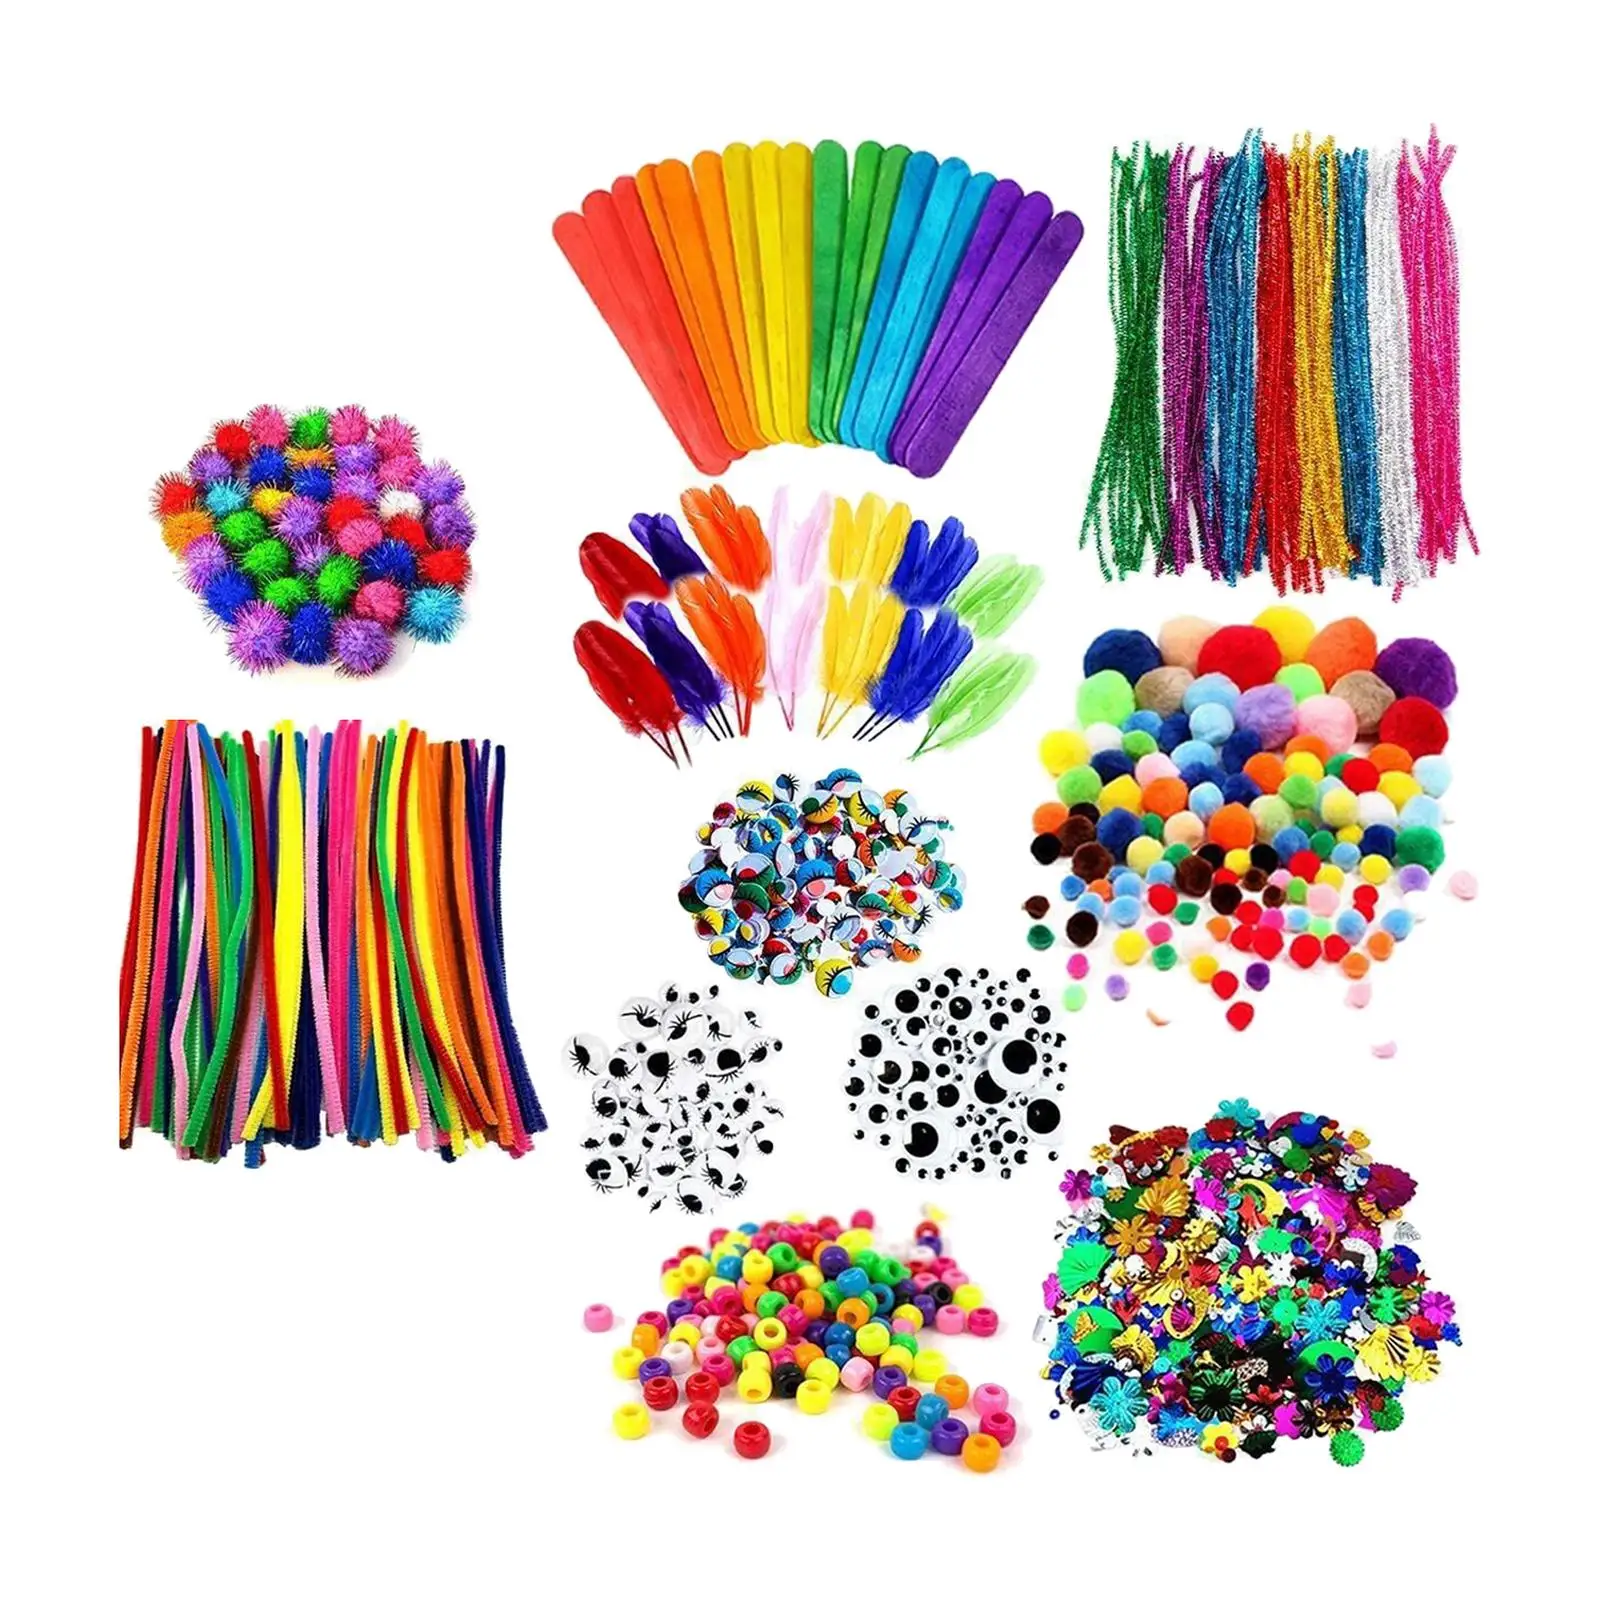 

Crafts for Kids Ages 4-8 Age 4-6, 8-12 Boys Girls Toddler Craft Materials Set DIY School Supplies for School Crafting Project